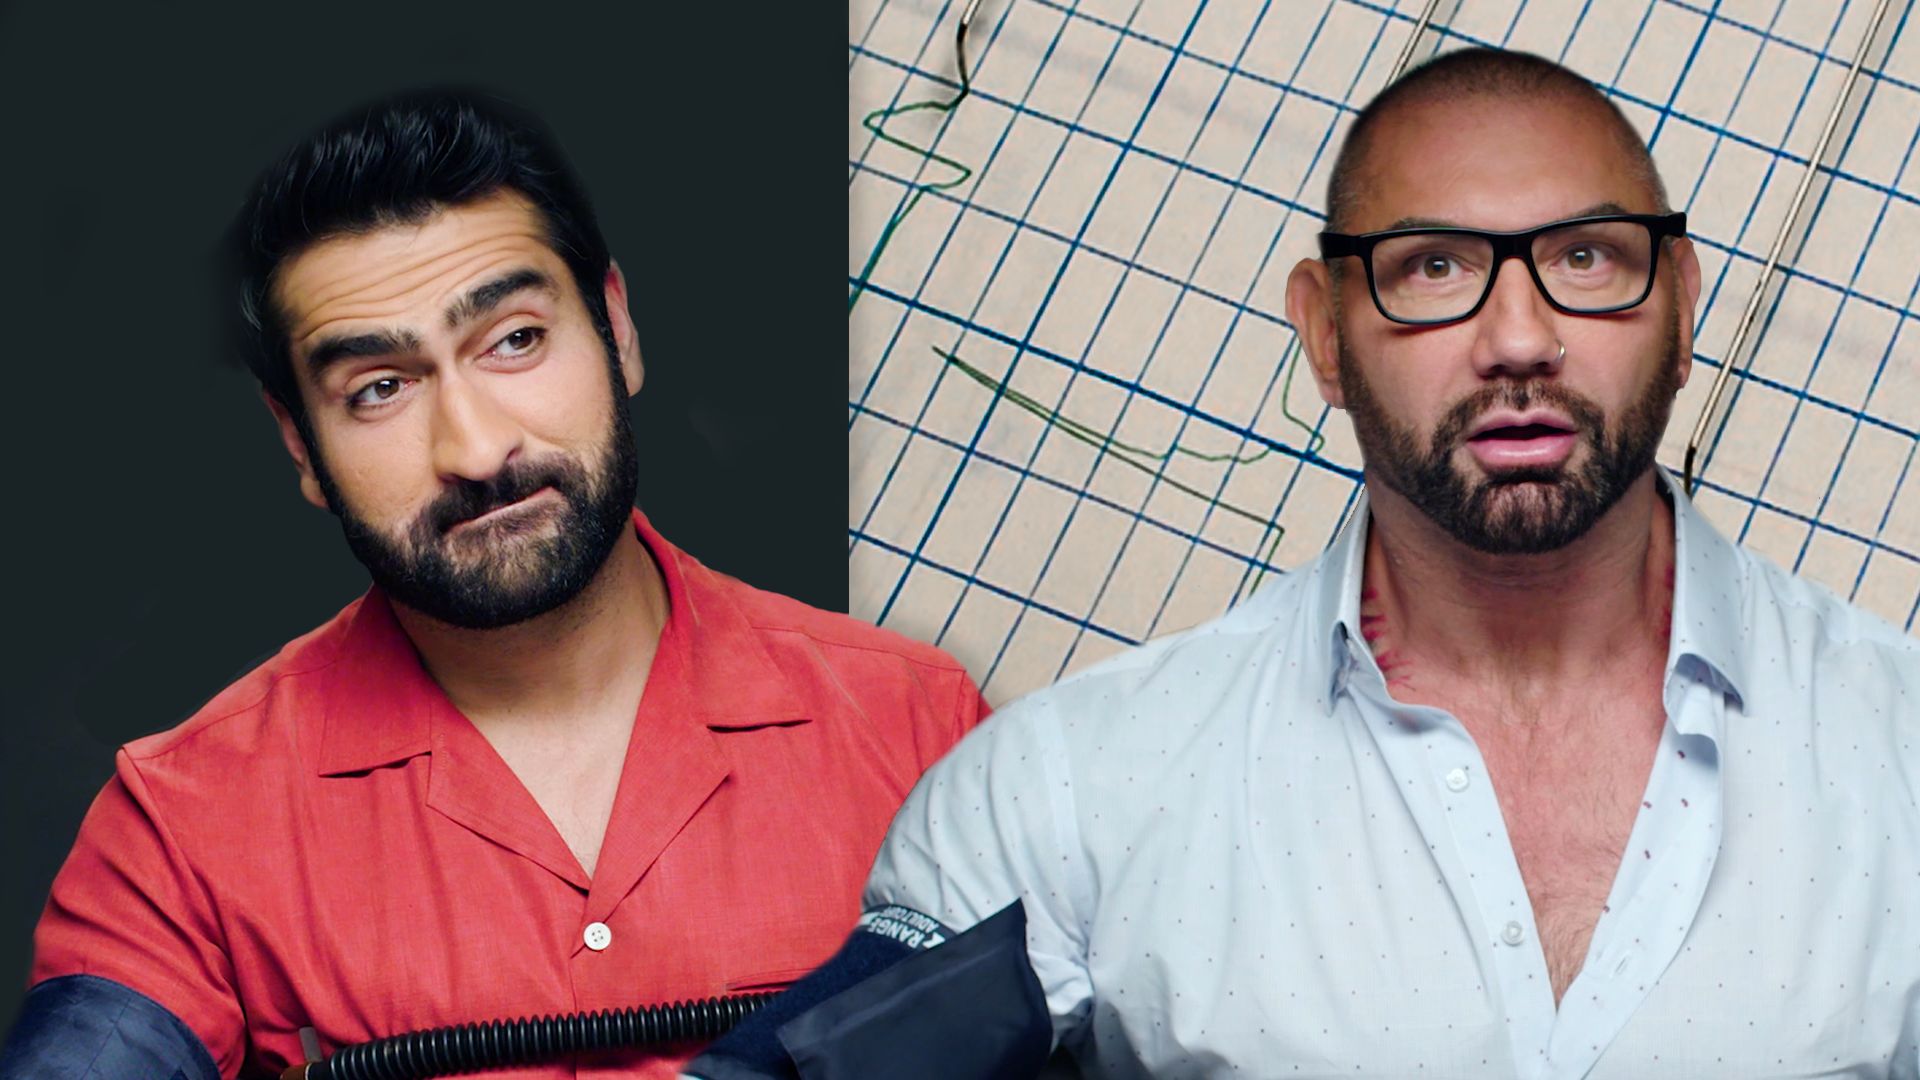 Stuber Stars Dave Bautista And Kumail Nanjiani Discuss Who'd Win In A Fight And Uber Rides From Hell